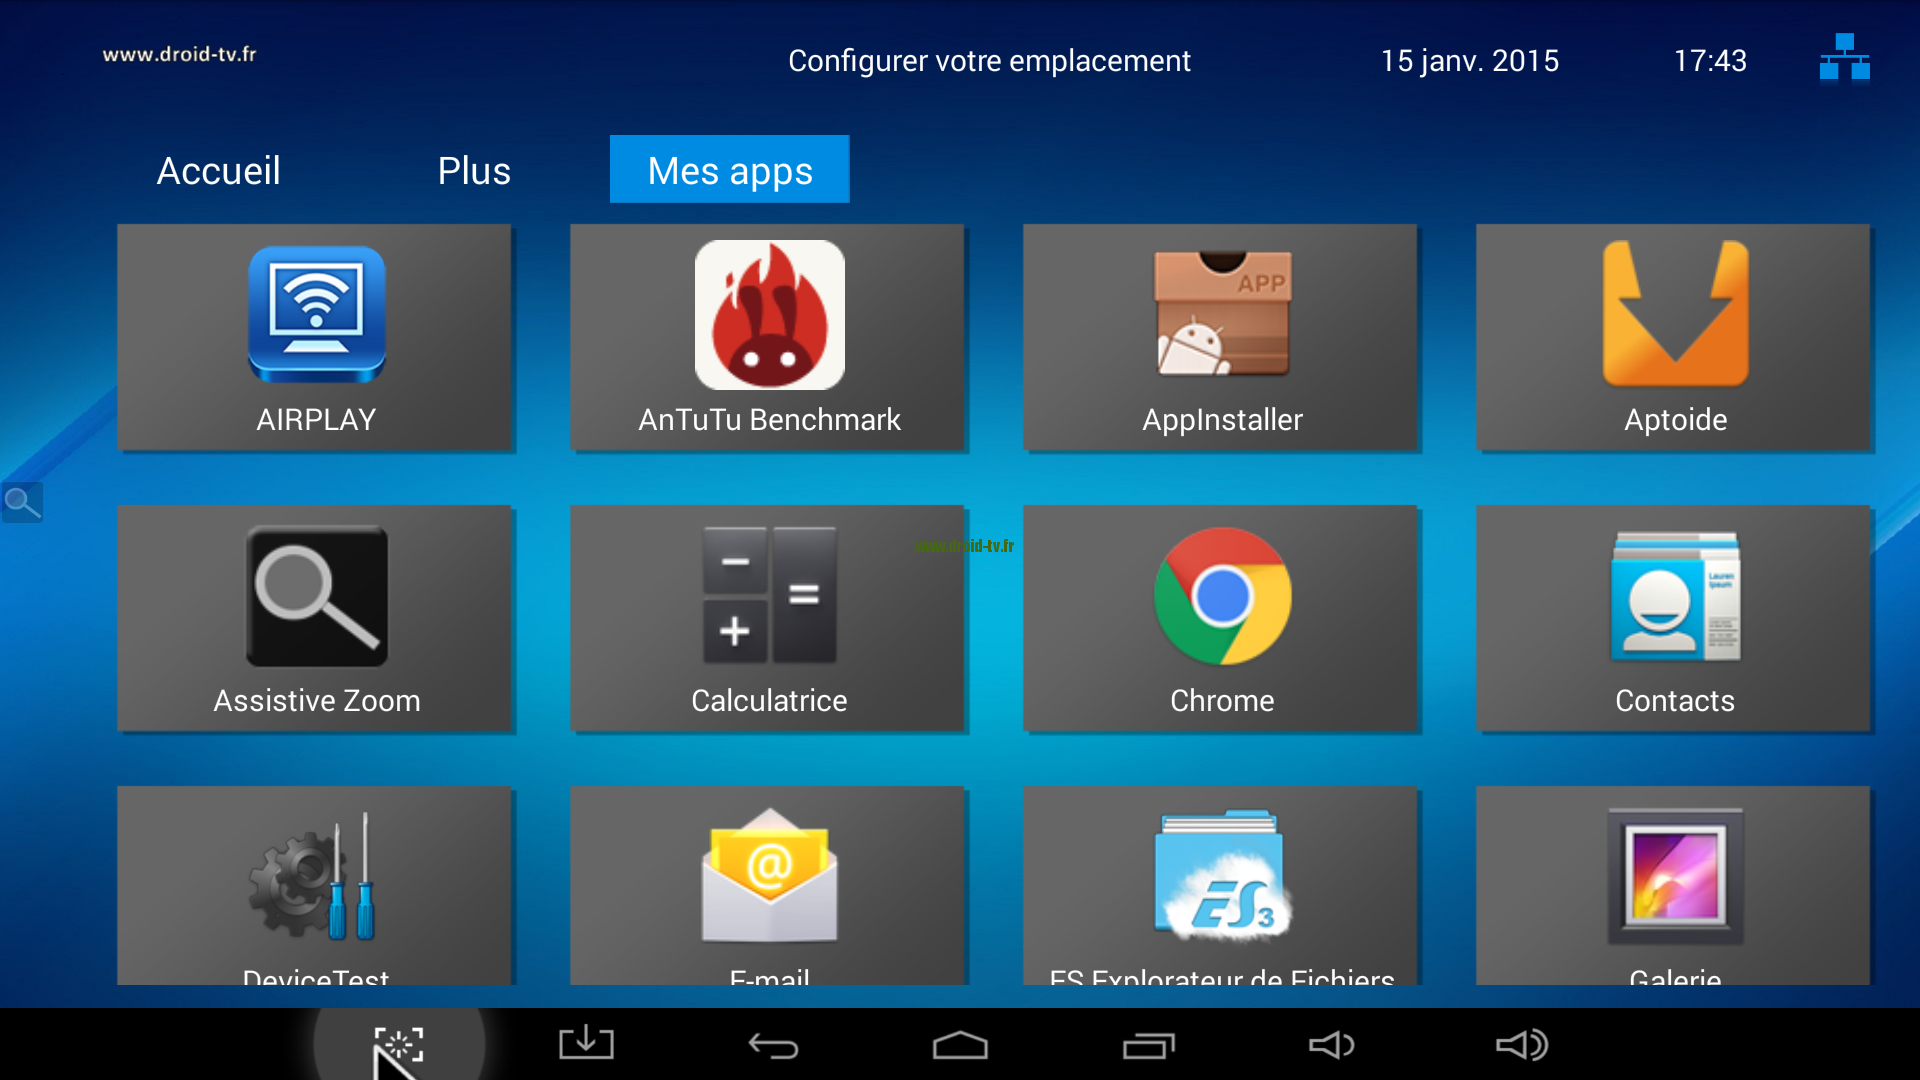 Applications installées Android Droid-TV.fr